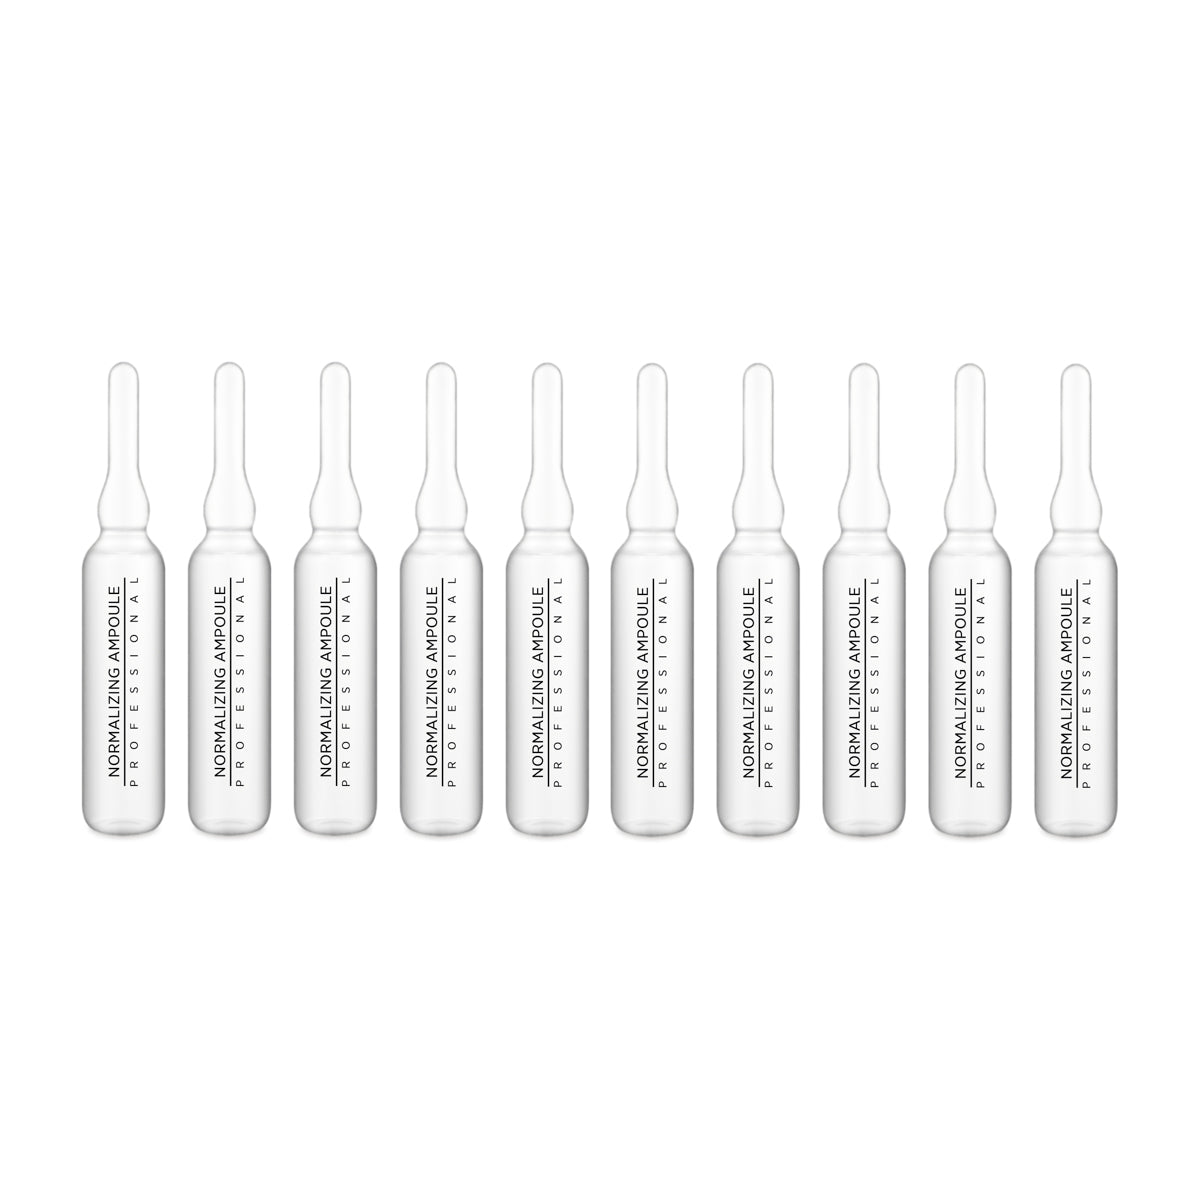 Syis normalizing ampoules 10x3ml